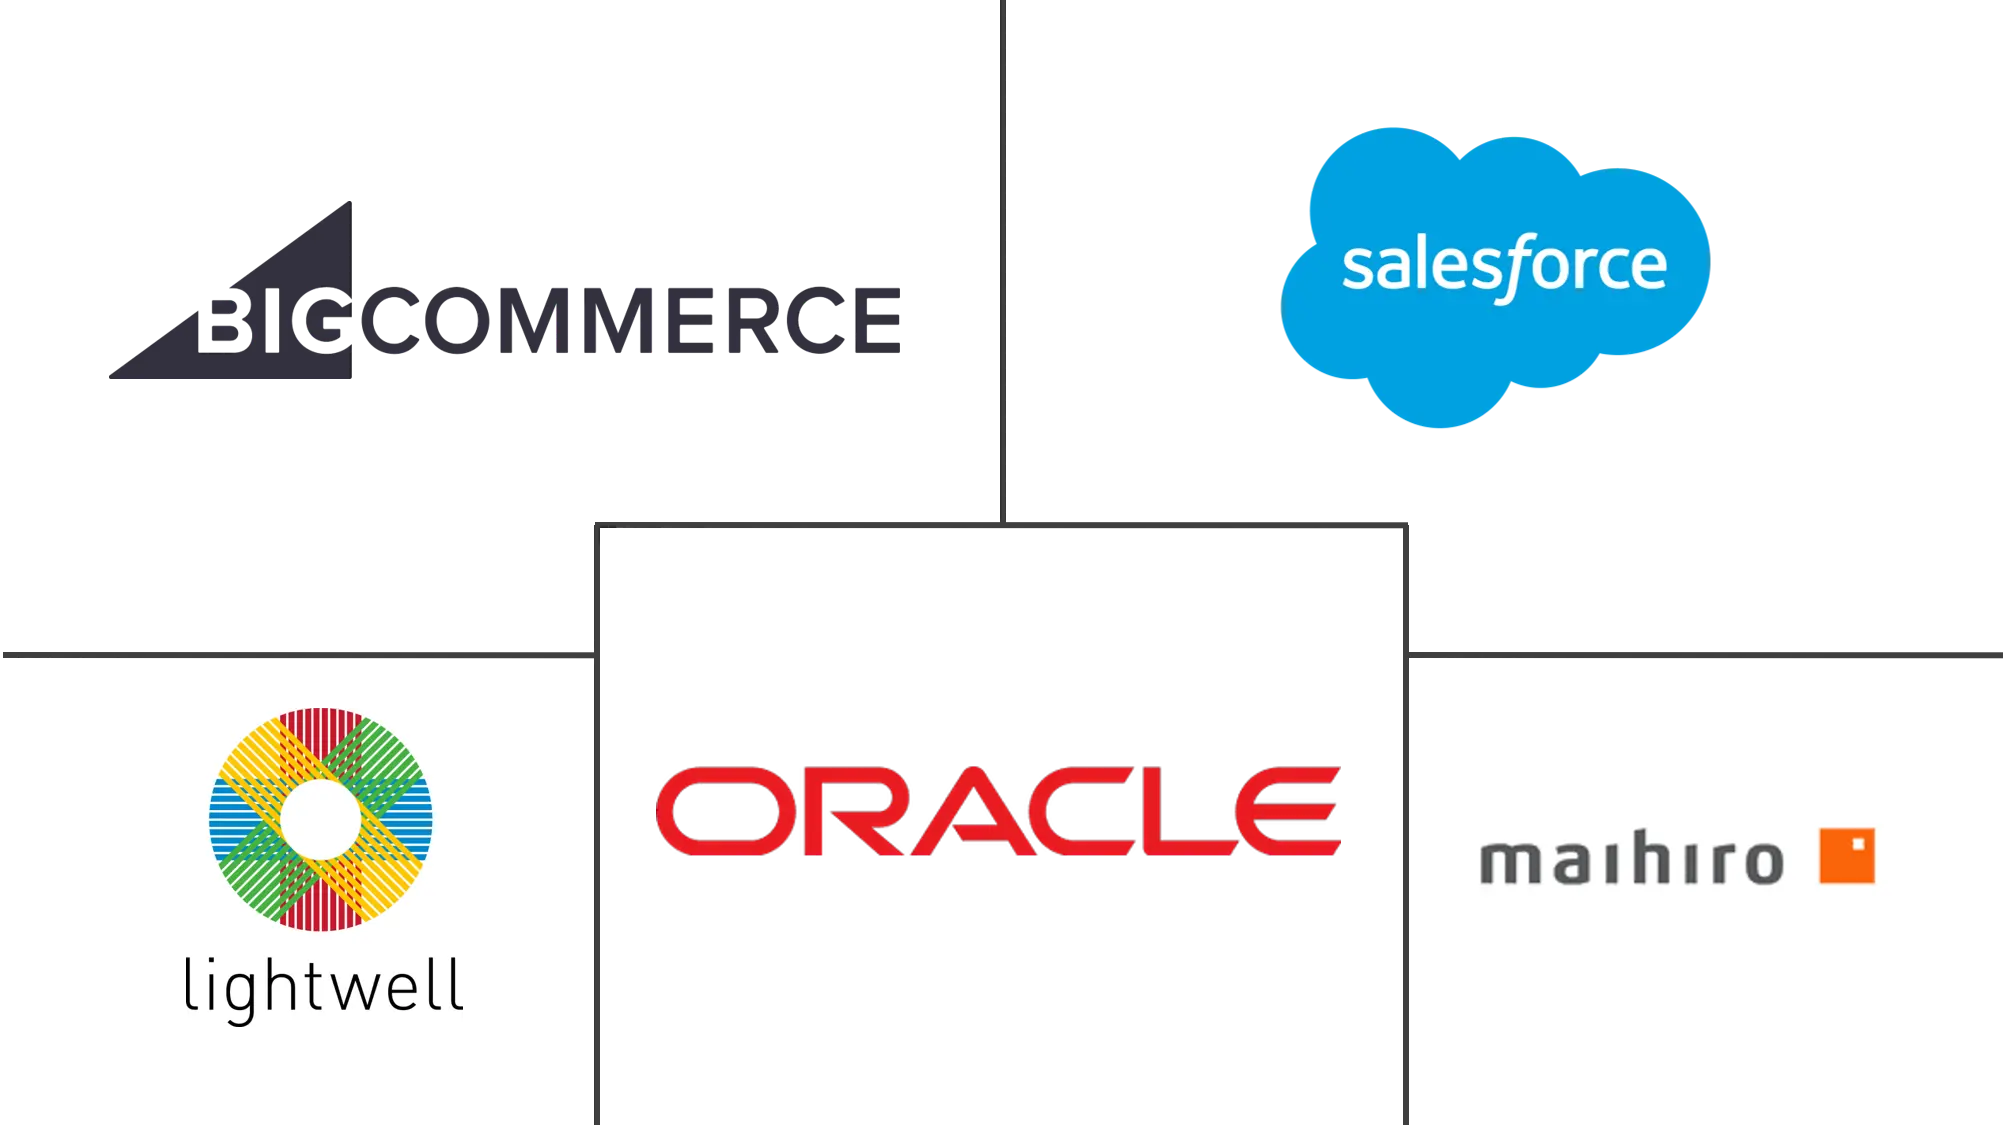 commerce cloud industry major players